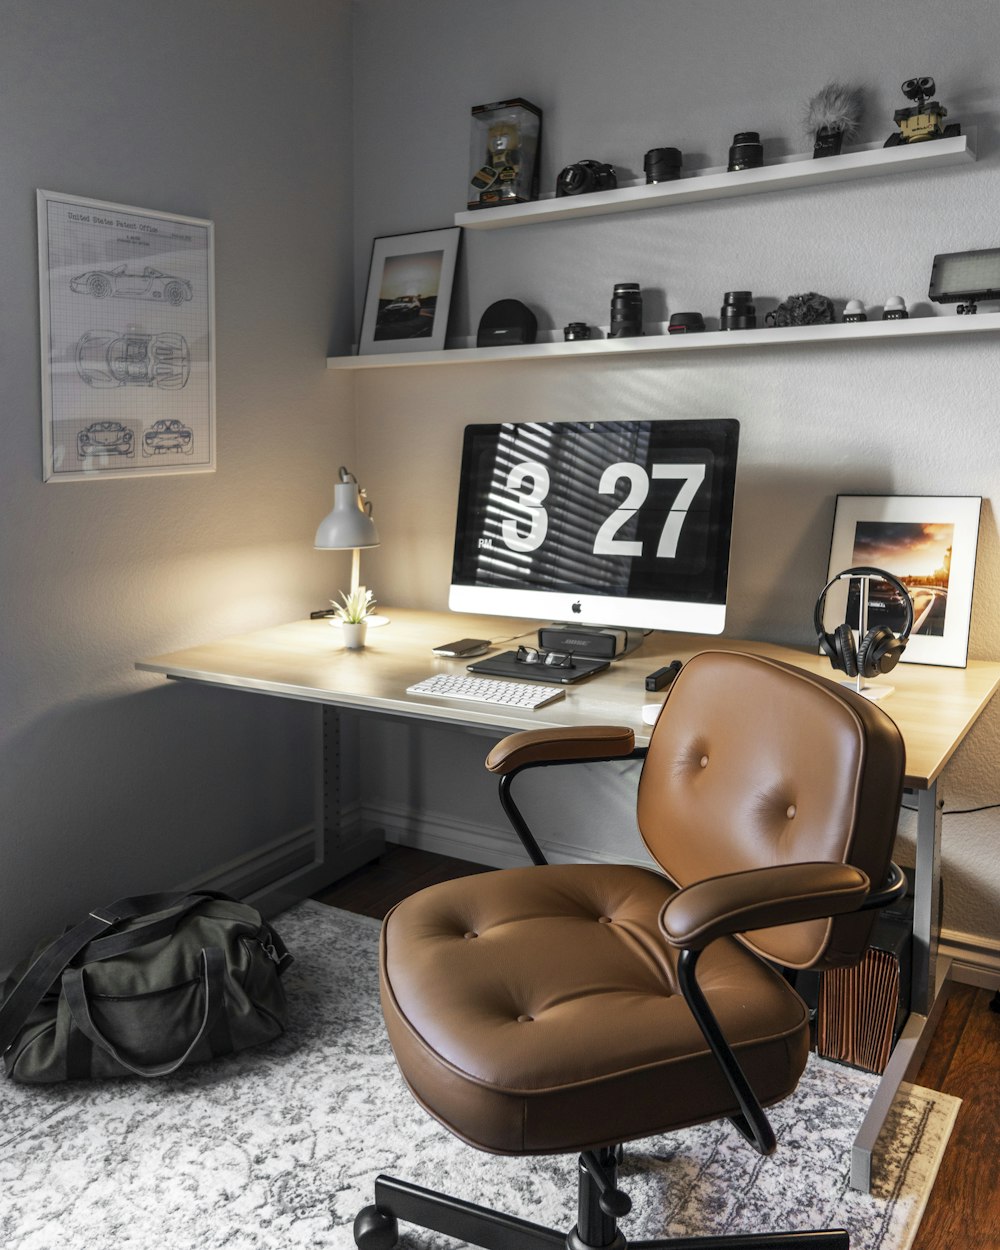 7 Home Office Designs To Inspire Your New At-Home Workspace - City